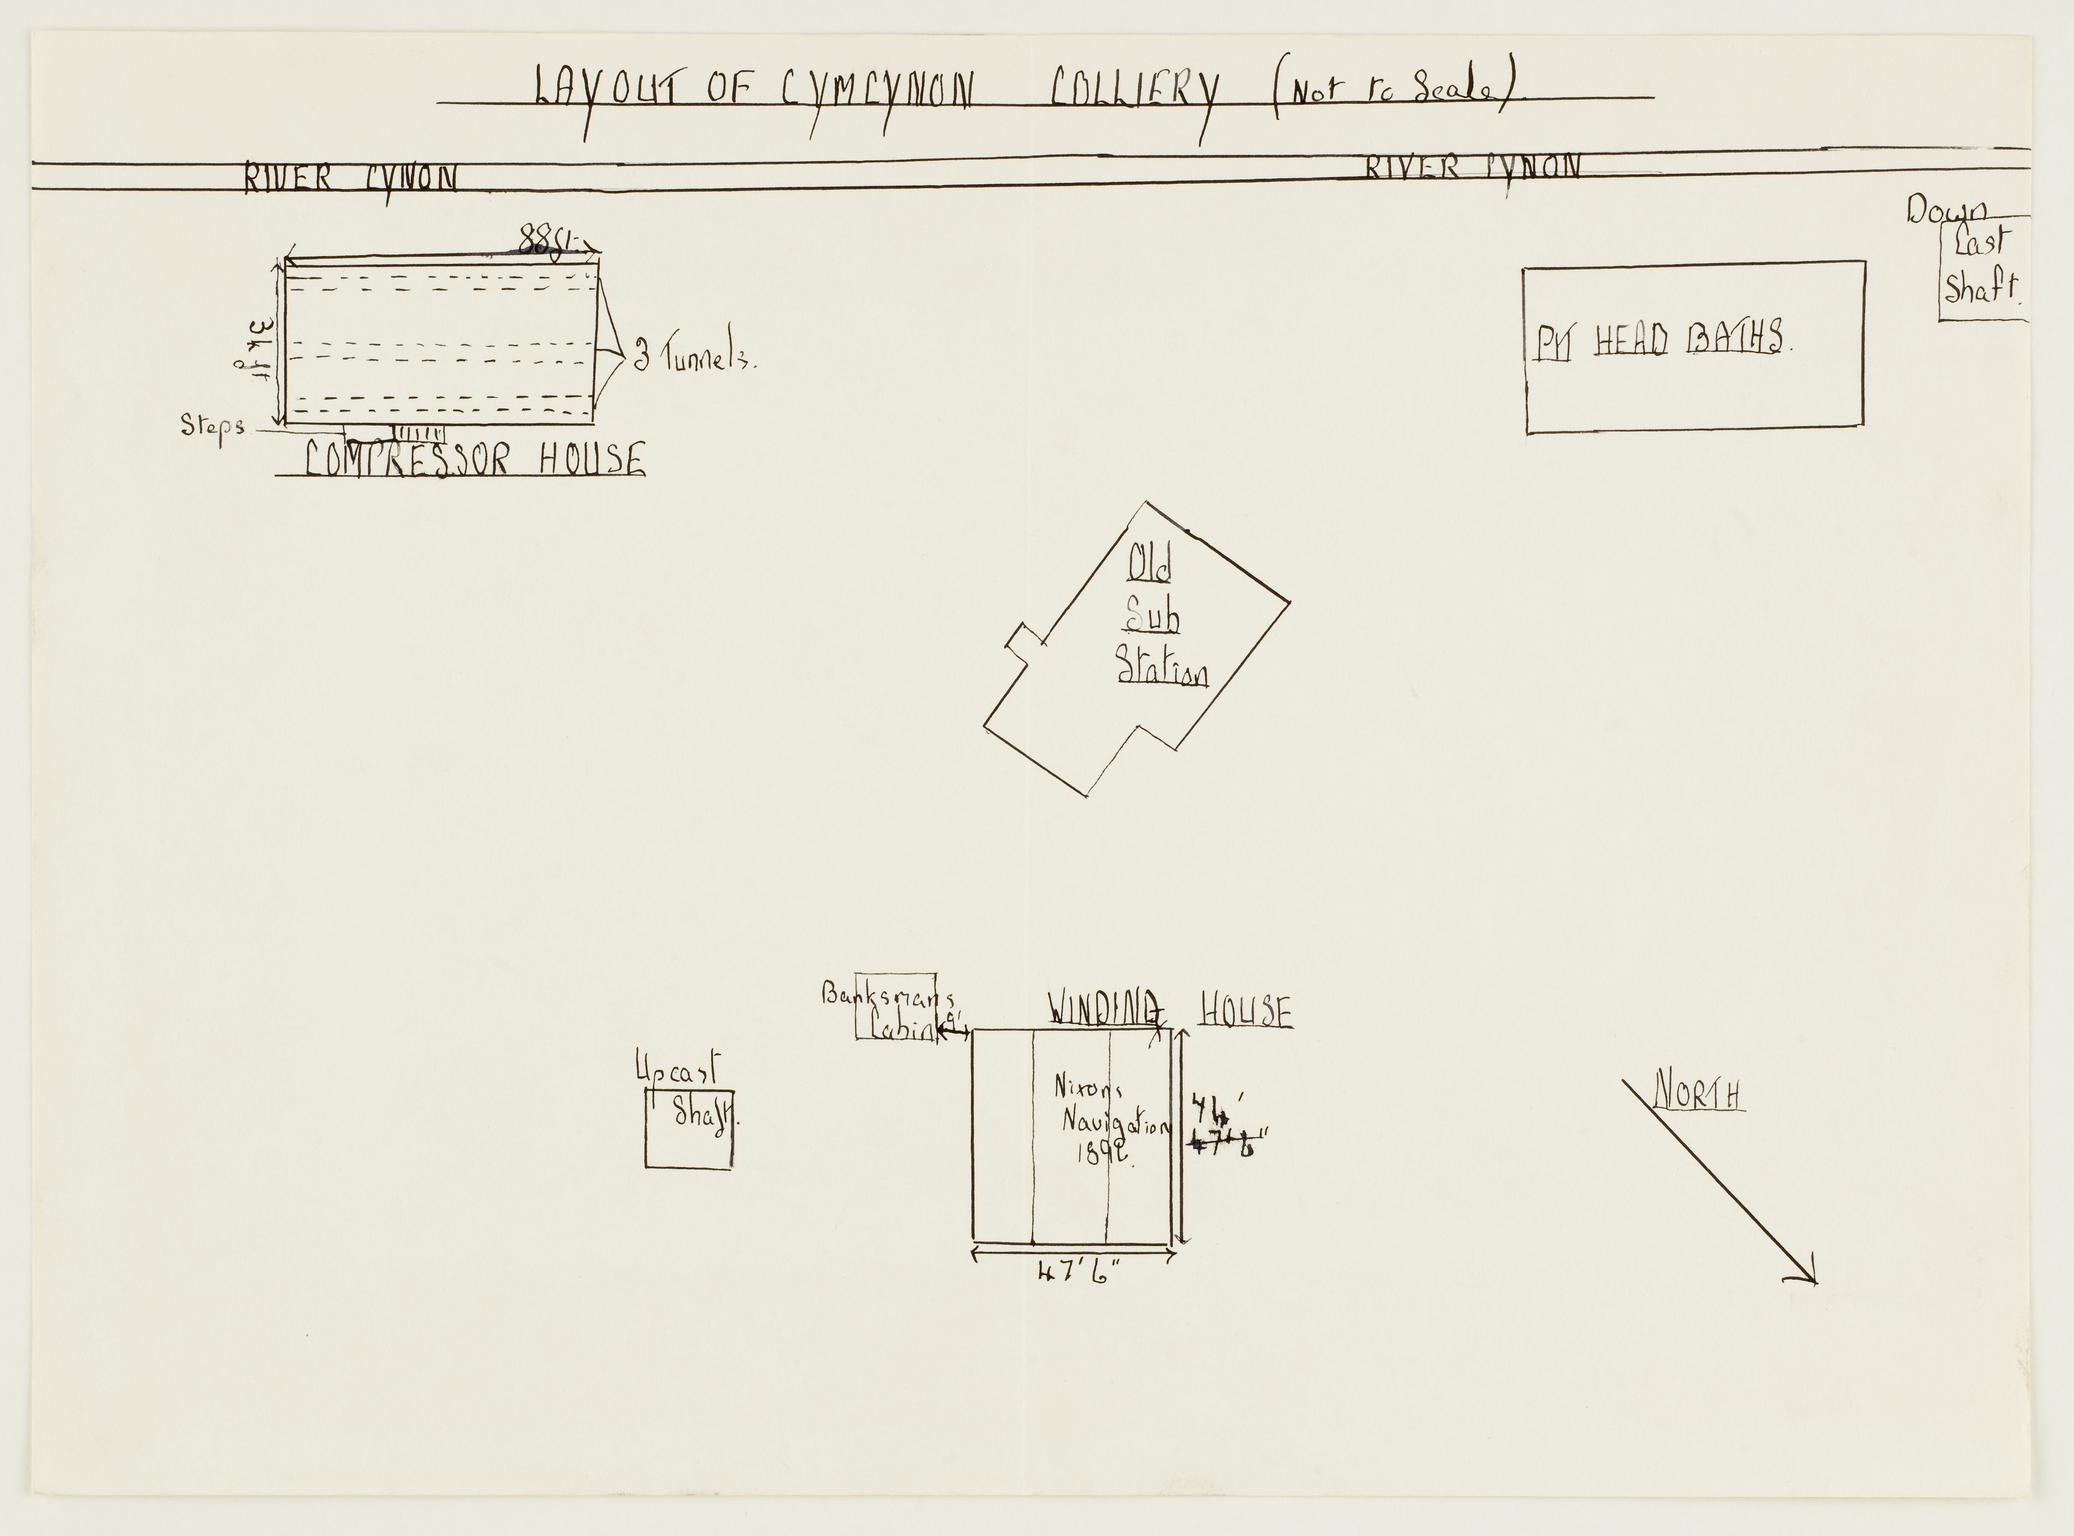 Layout of Cymcynon Colliery (plan)